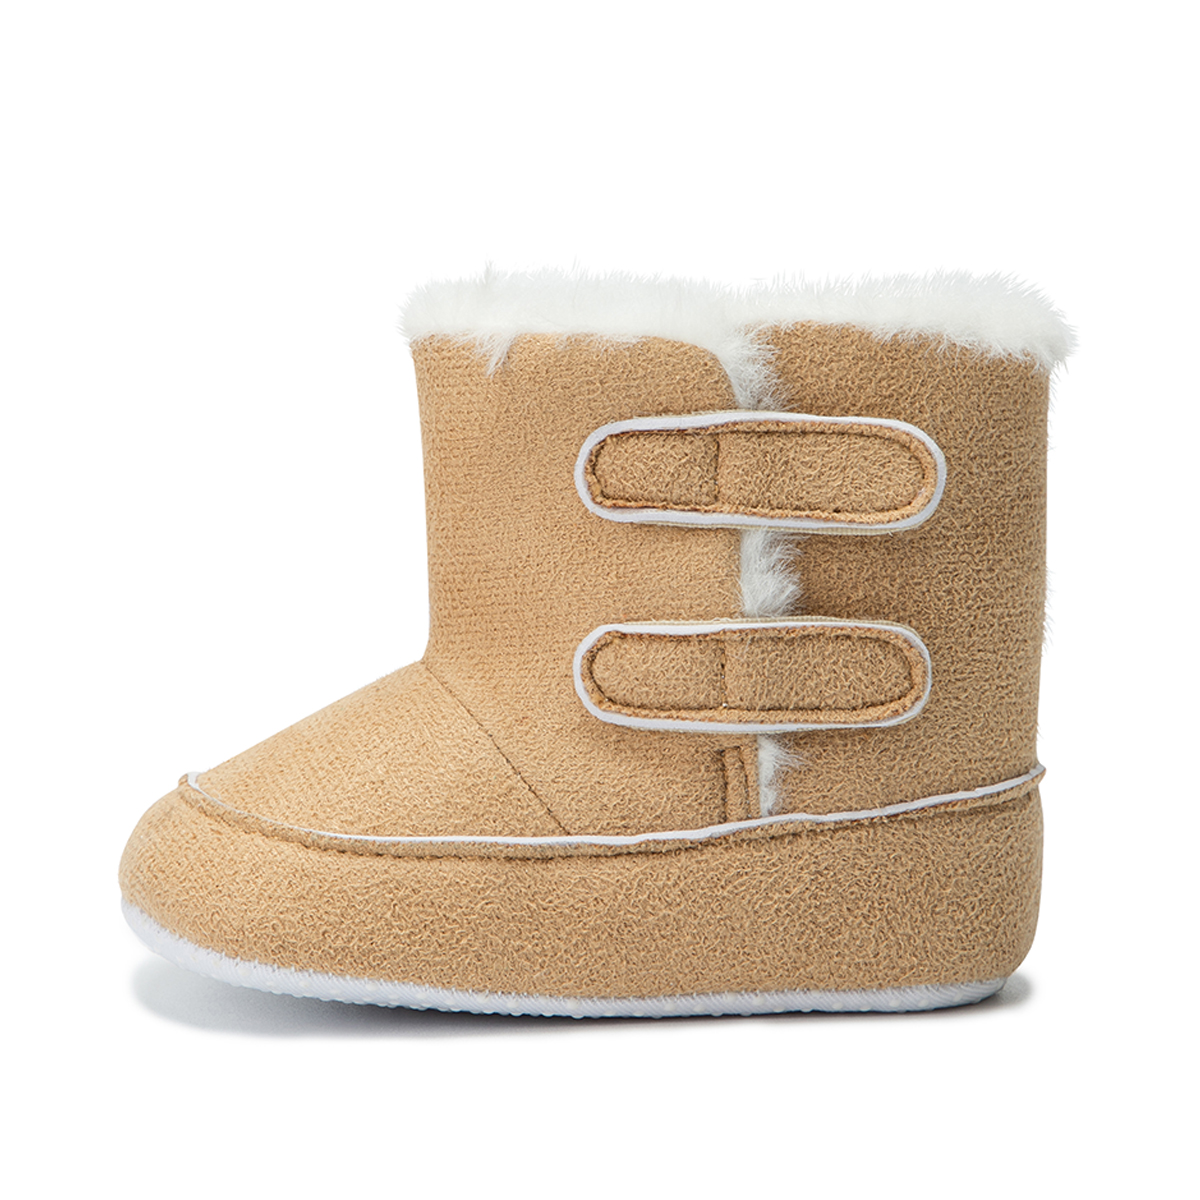 Wholesale Faux Suede Upper Warm Winter Baby Boots